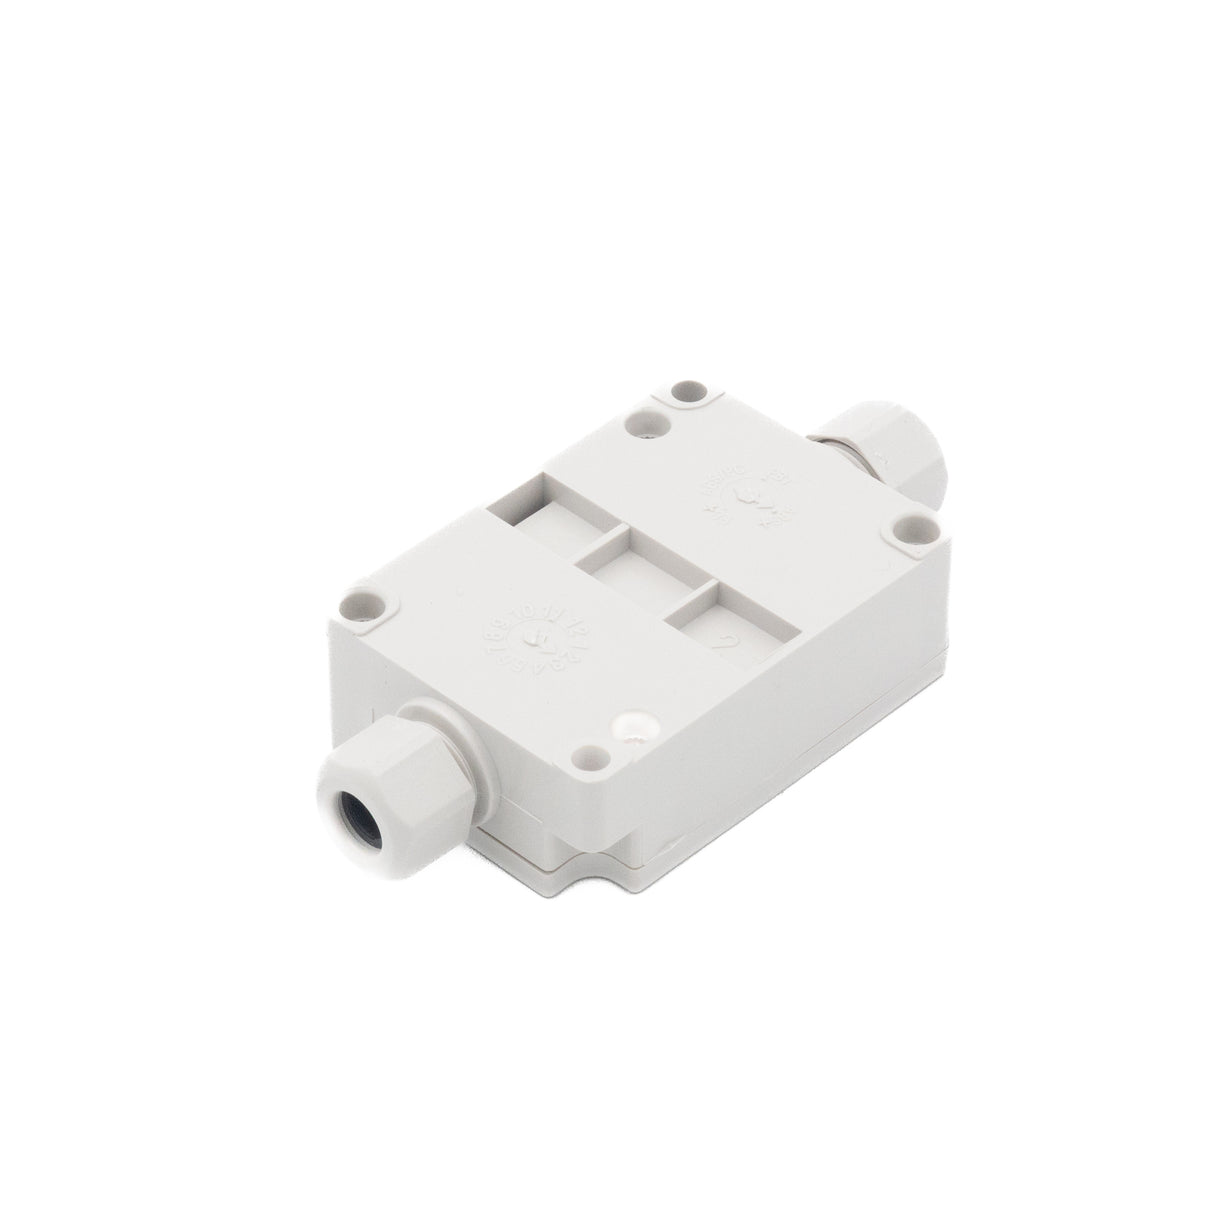 Boxco Terminal Box 6-pole with Waterproof Connector 50x70x24mm, IP67, IK08, ABS, Grey Cover - PHOTO 2